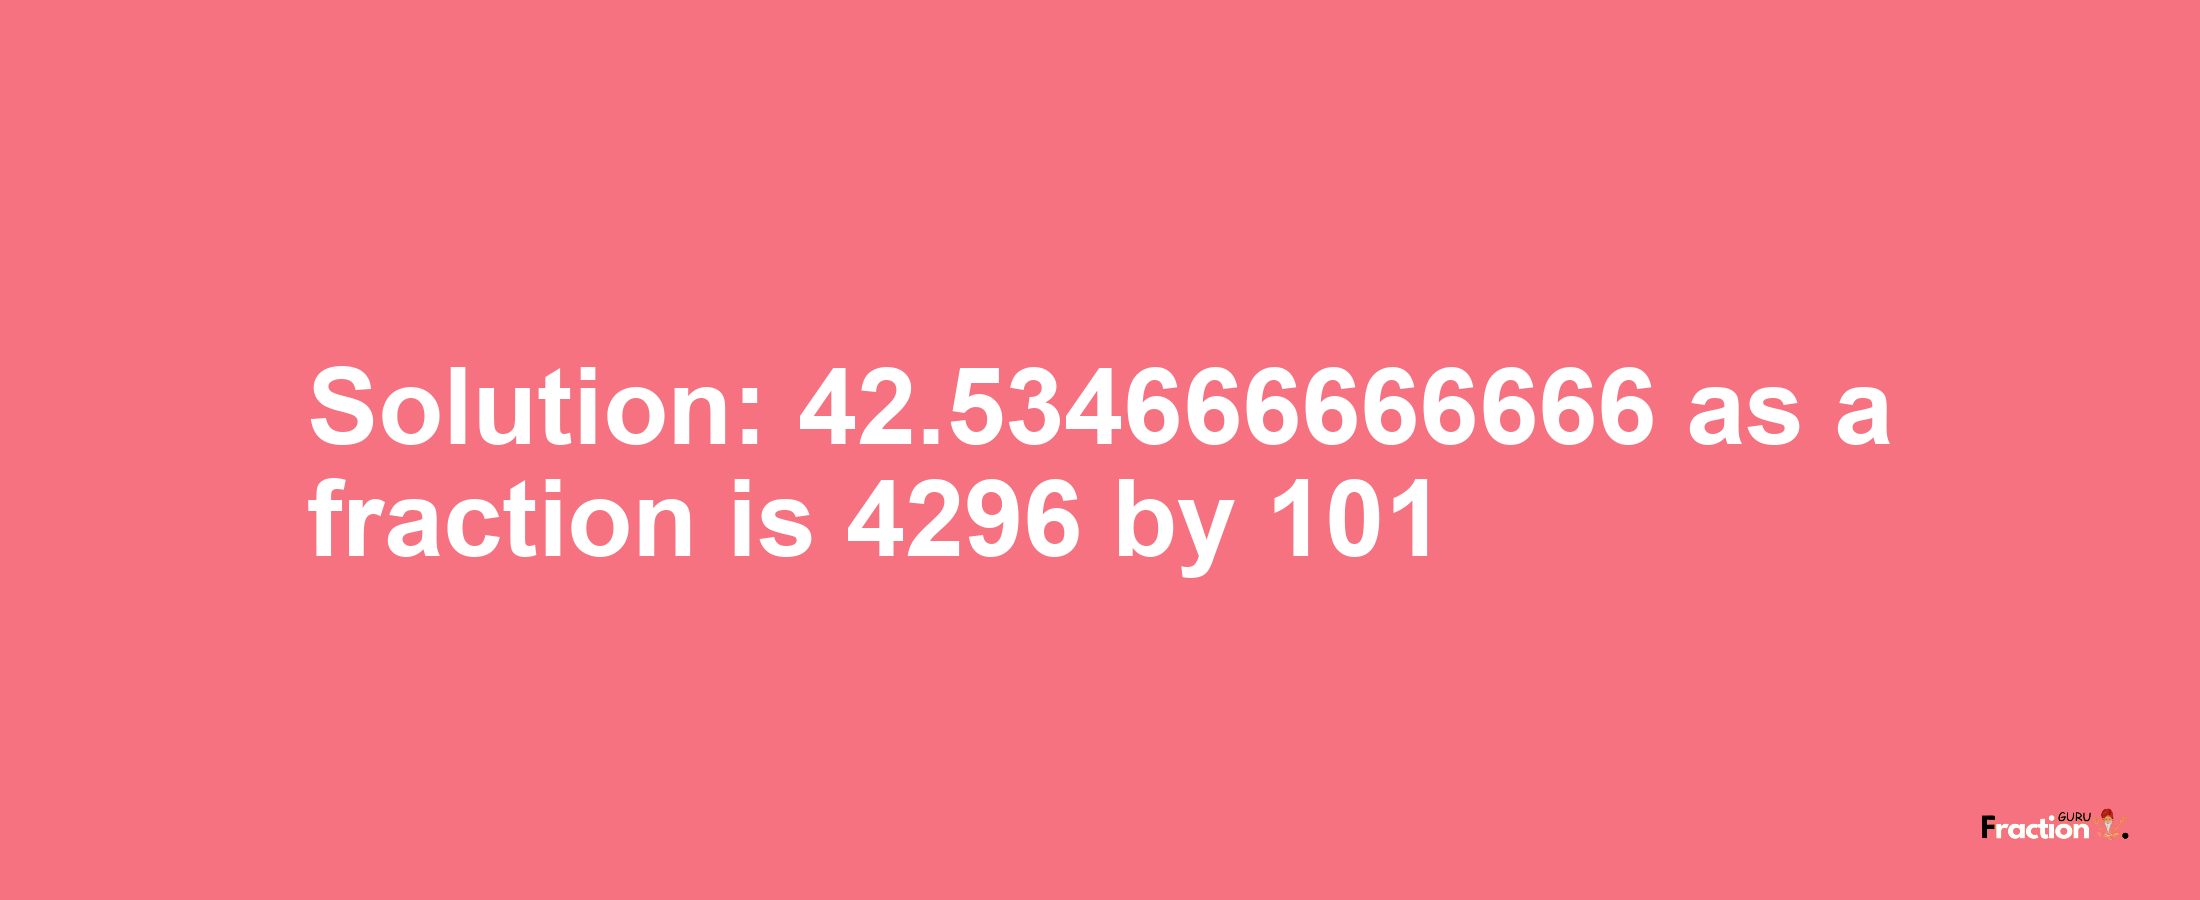 Solution:42.534666666666 as a fraction is 4296/101